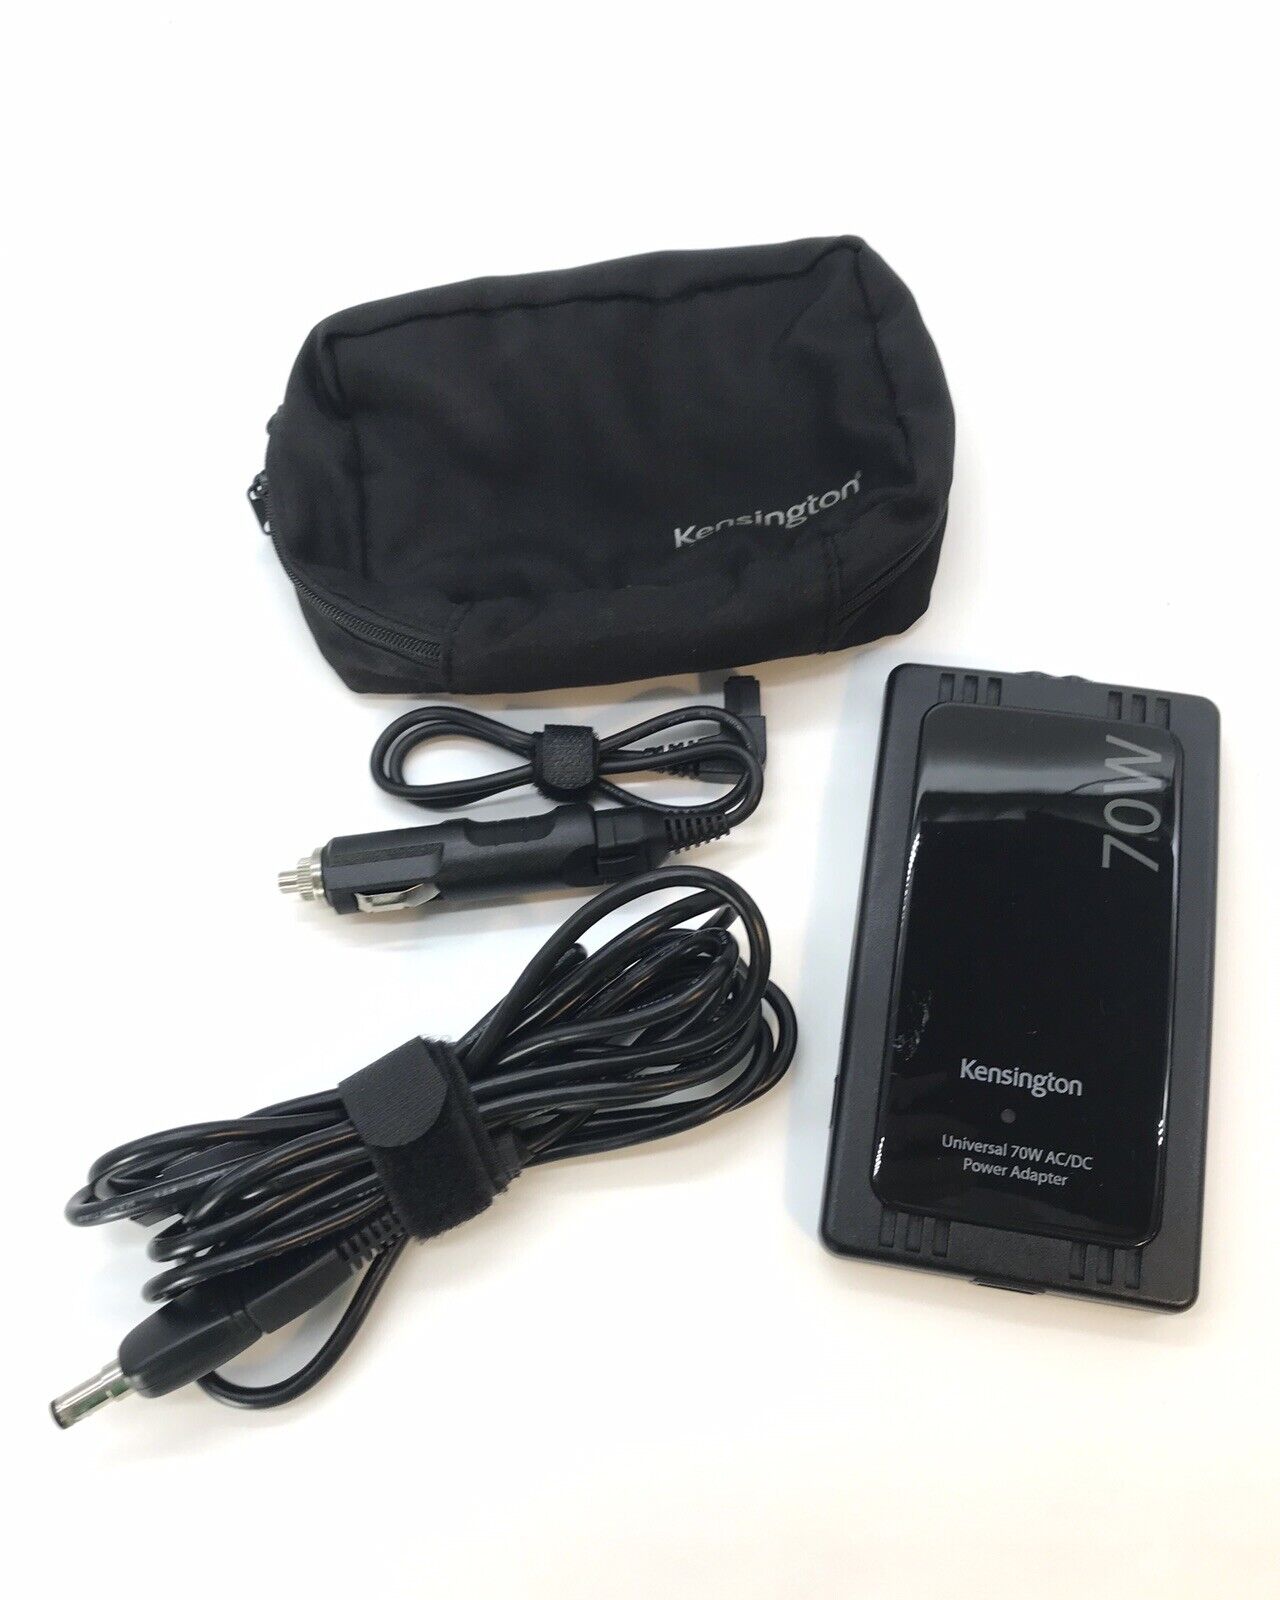 Kensington 33234 Universal 70w AC/DC Power Adapter Charger for Laptop N15